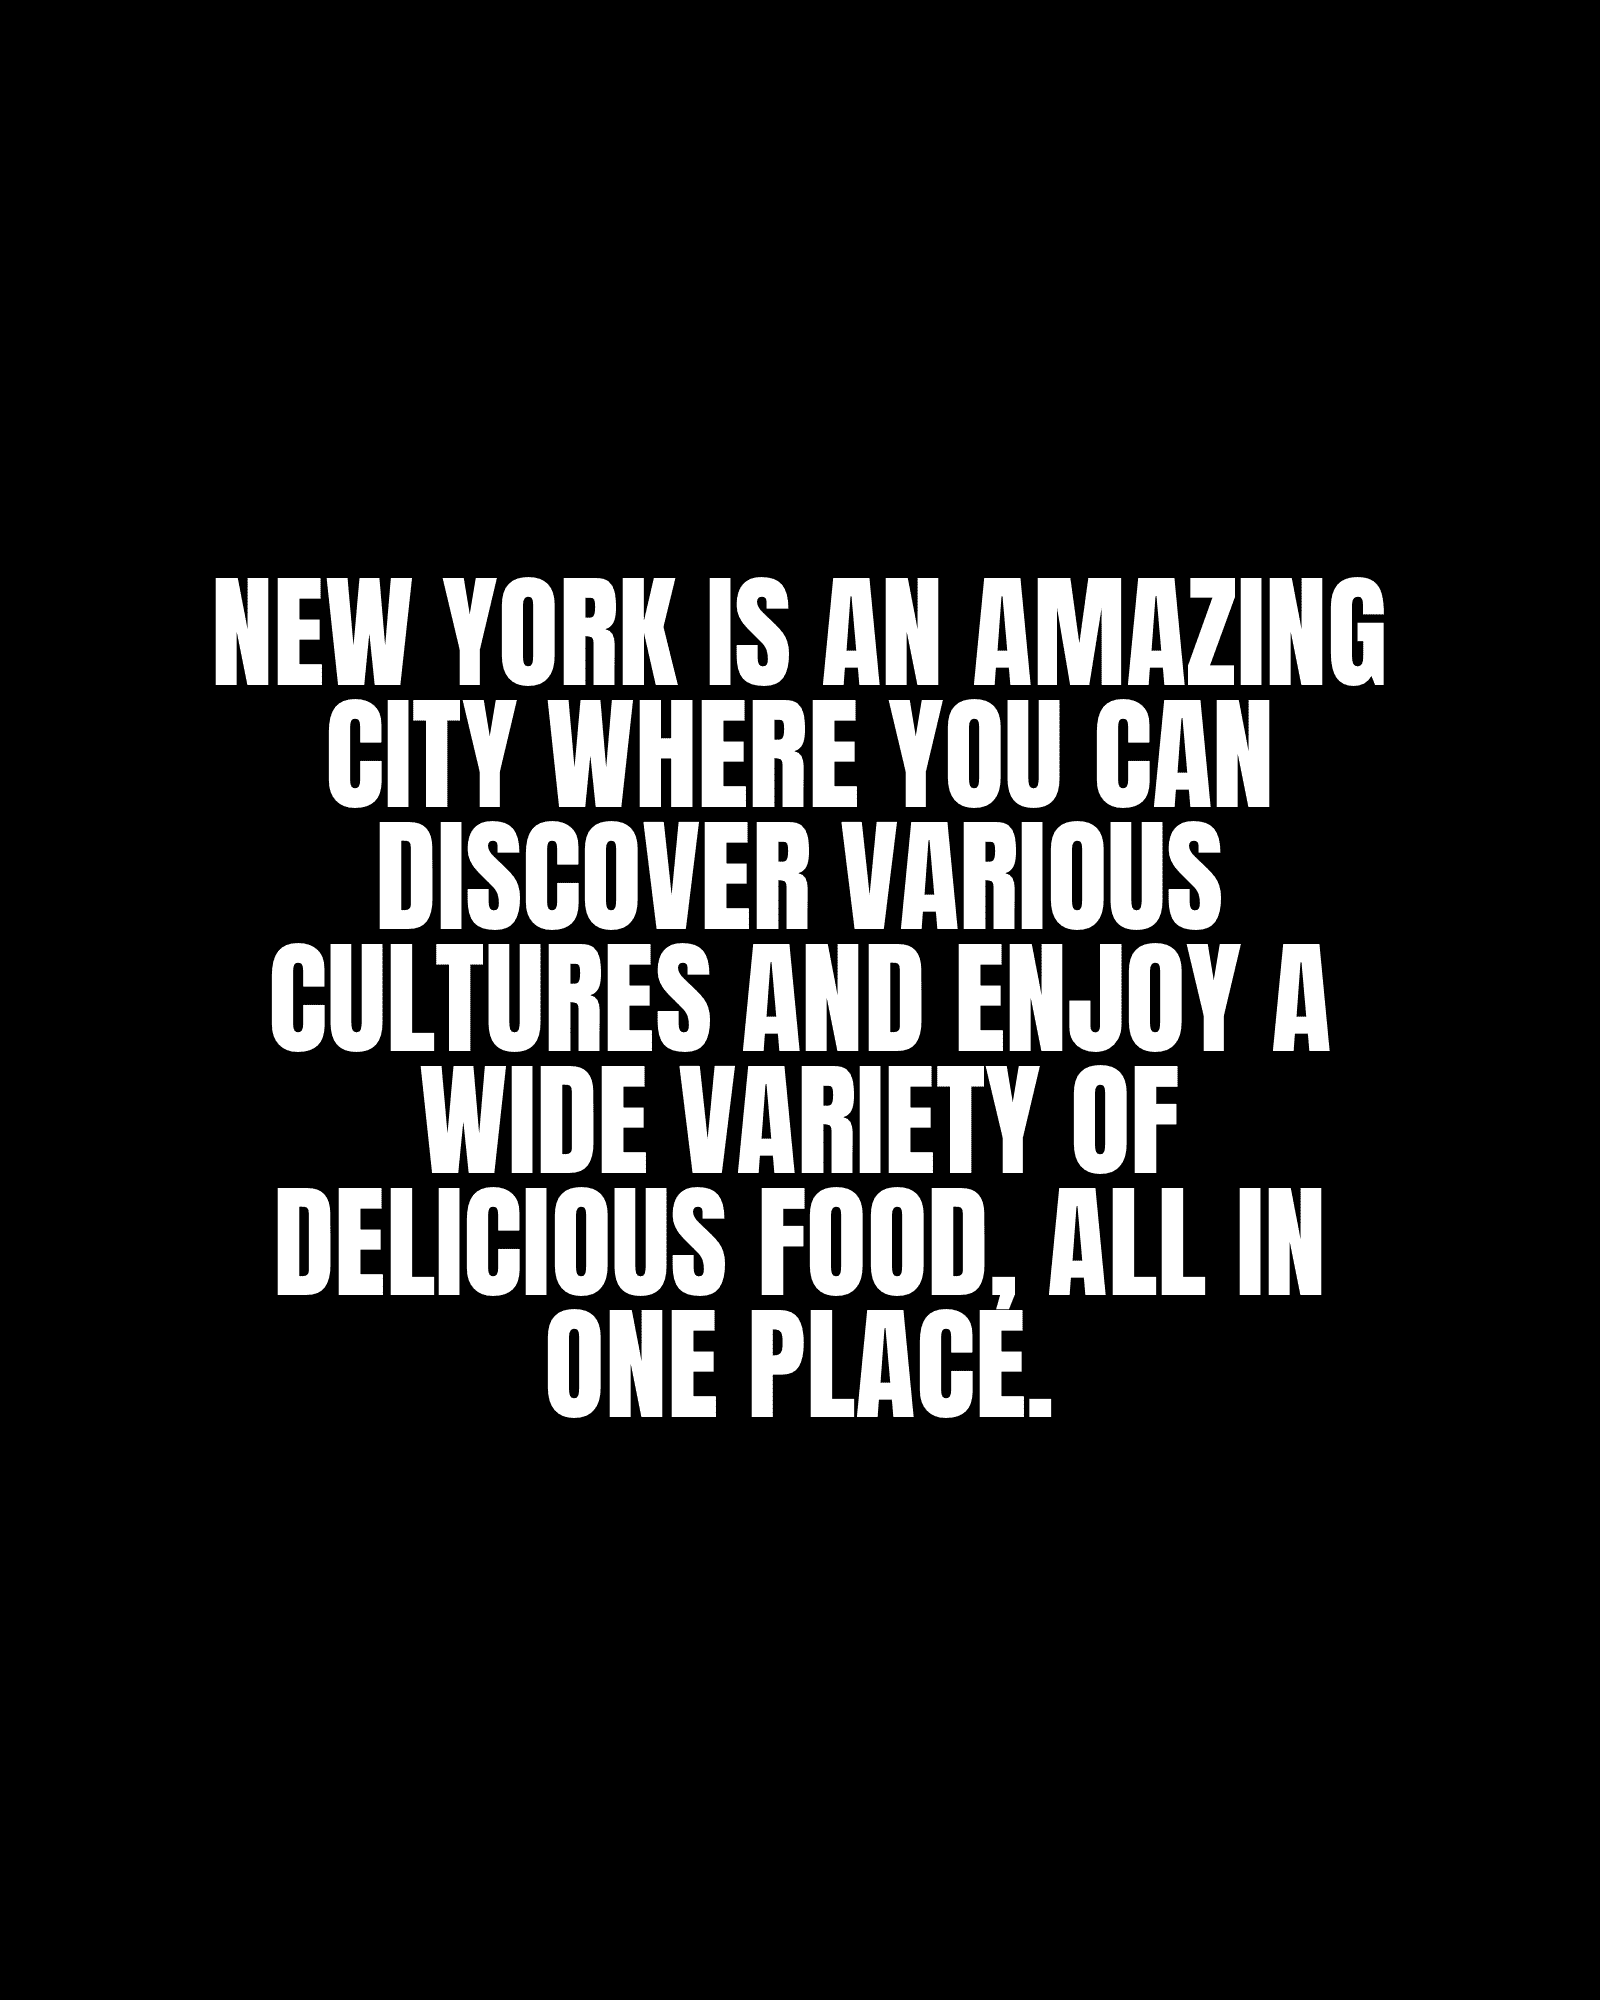 New York is an amazing city where you can discover various cultures and enjoy a wide variety of delicious food, all in one place.